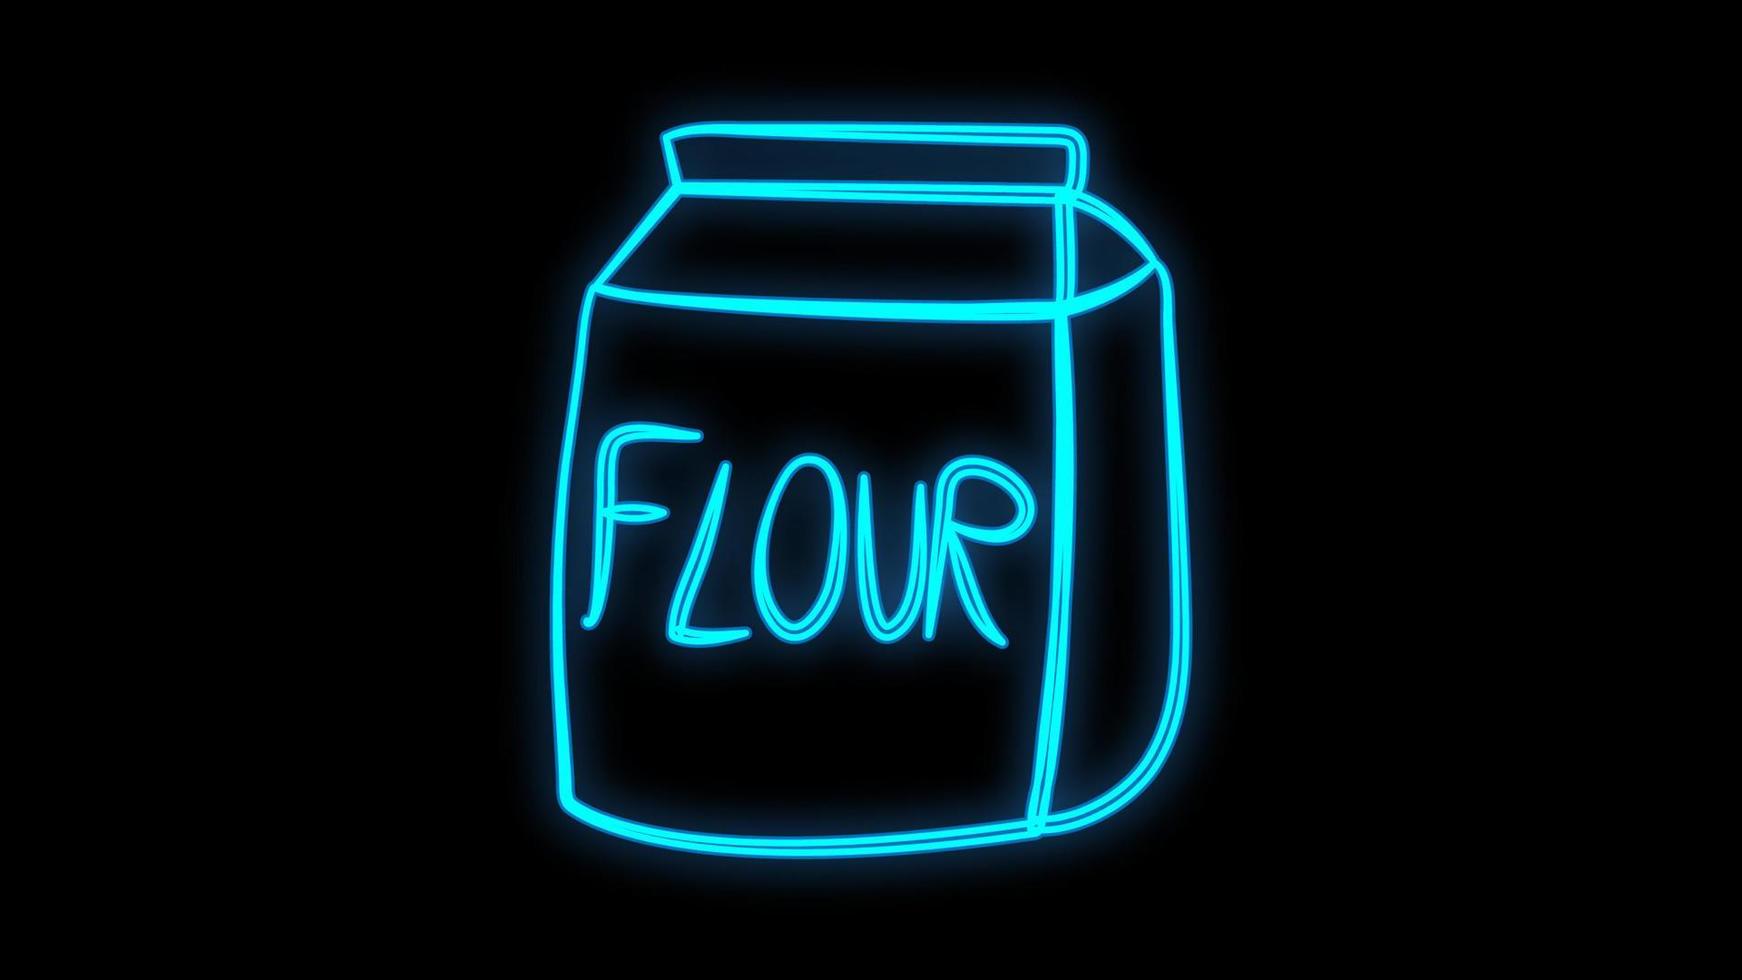 package with flour on a black background, vector illustration, neon. paper bag filled with ground millet. flour for baking. neon illustration, vintage, retro style. trendy neon blue